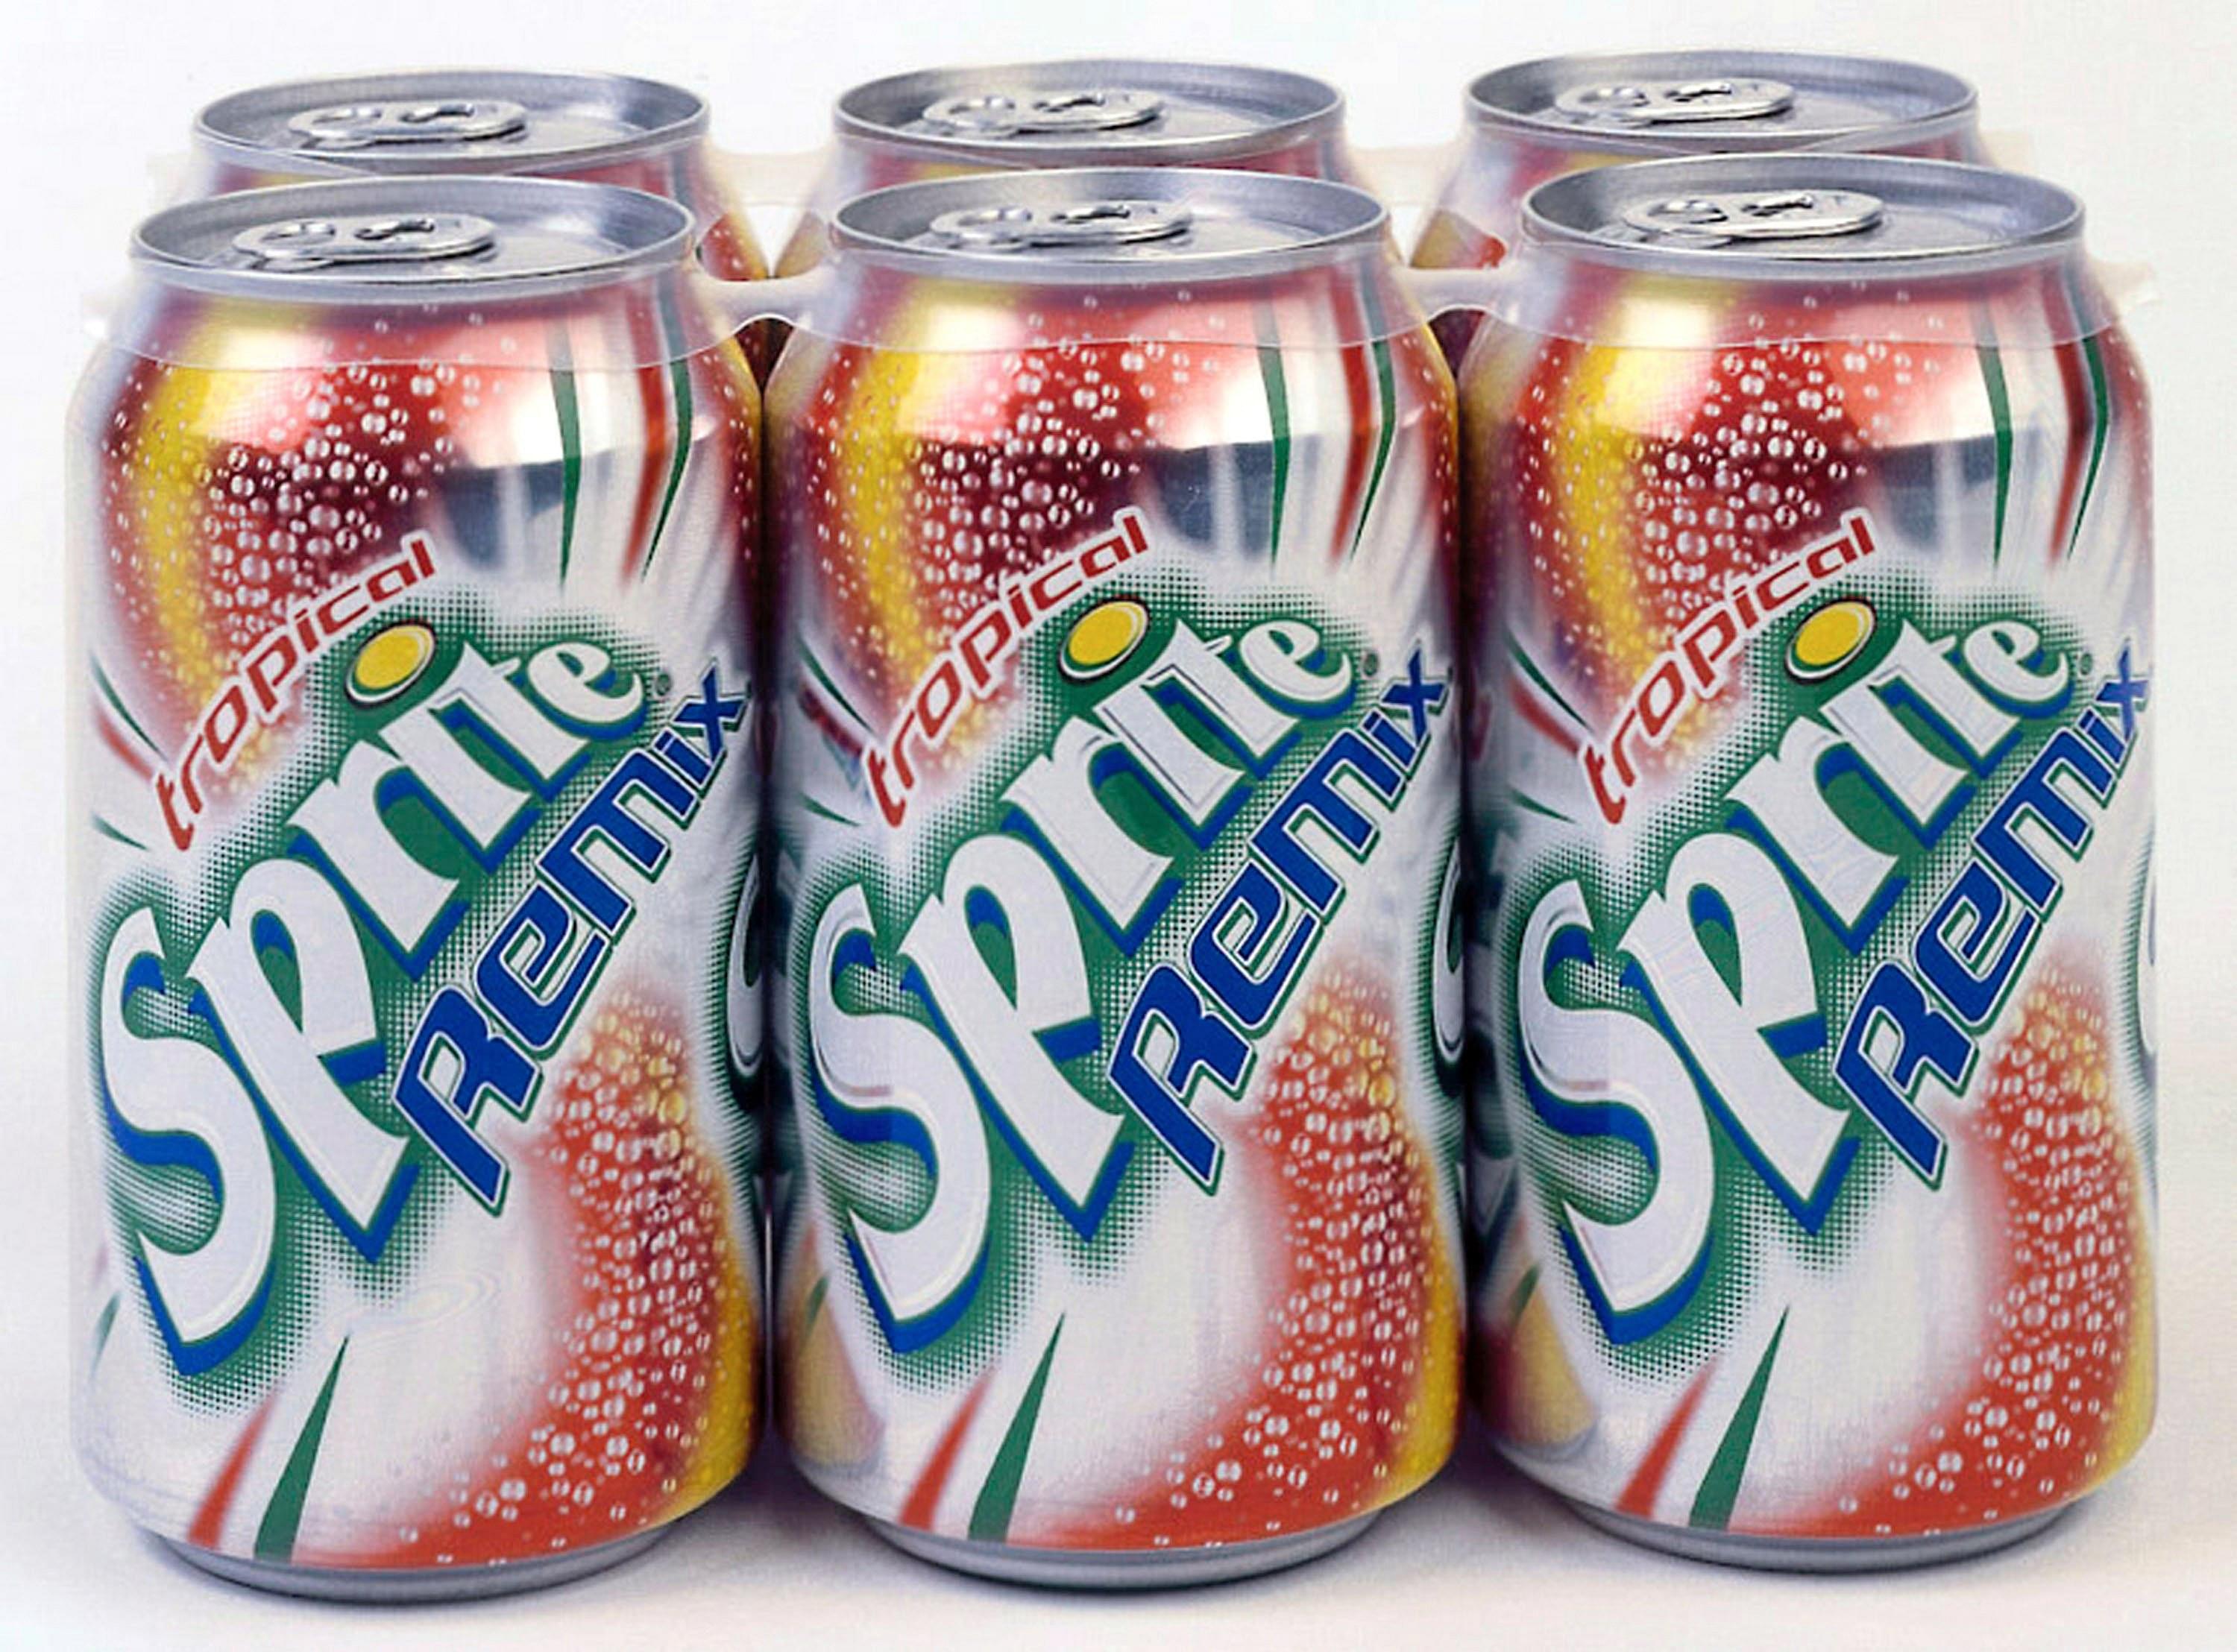 8 Soft Drink Brands That Will Give You a Taste of Nostalgia